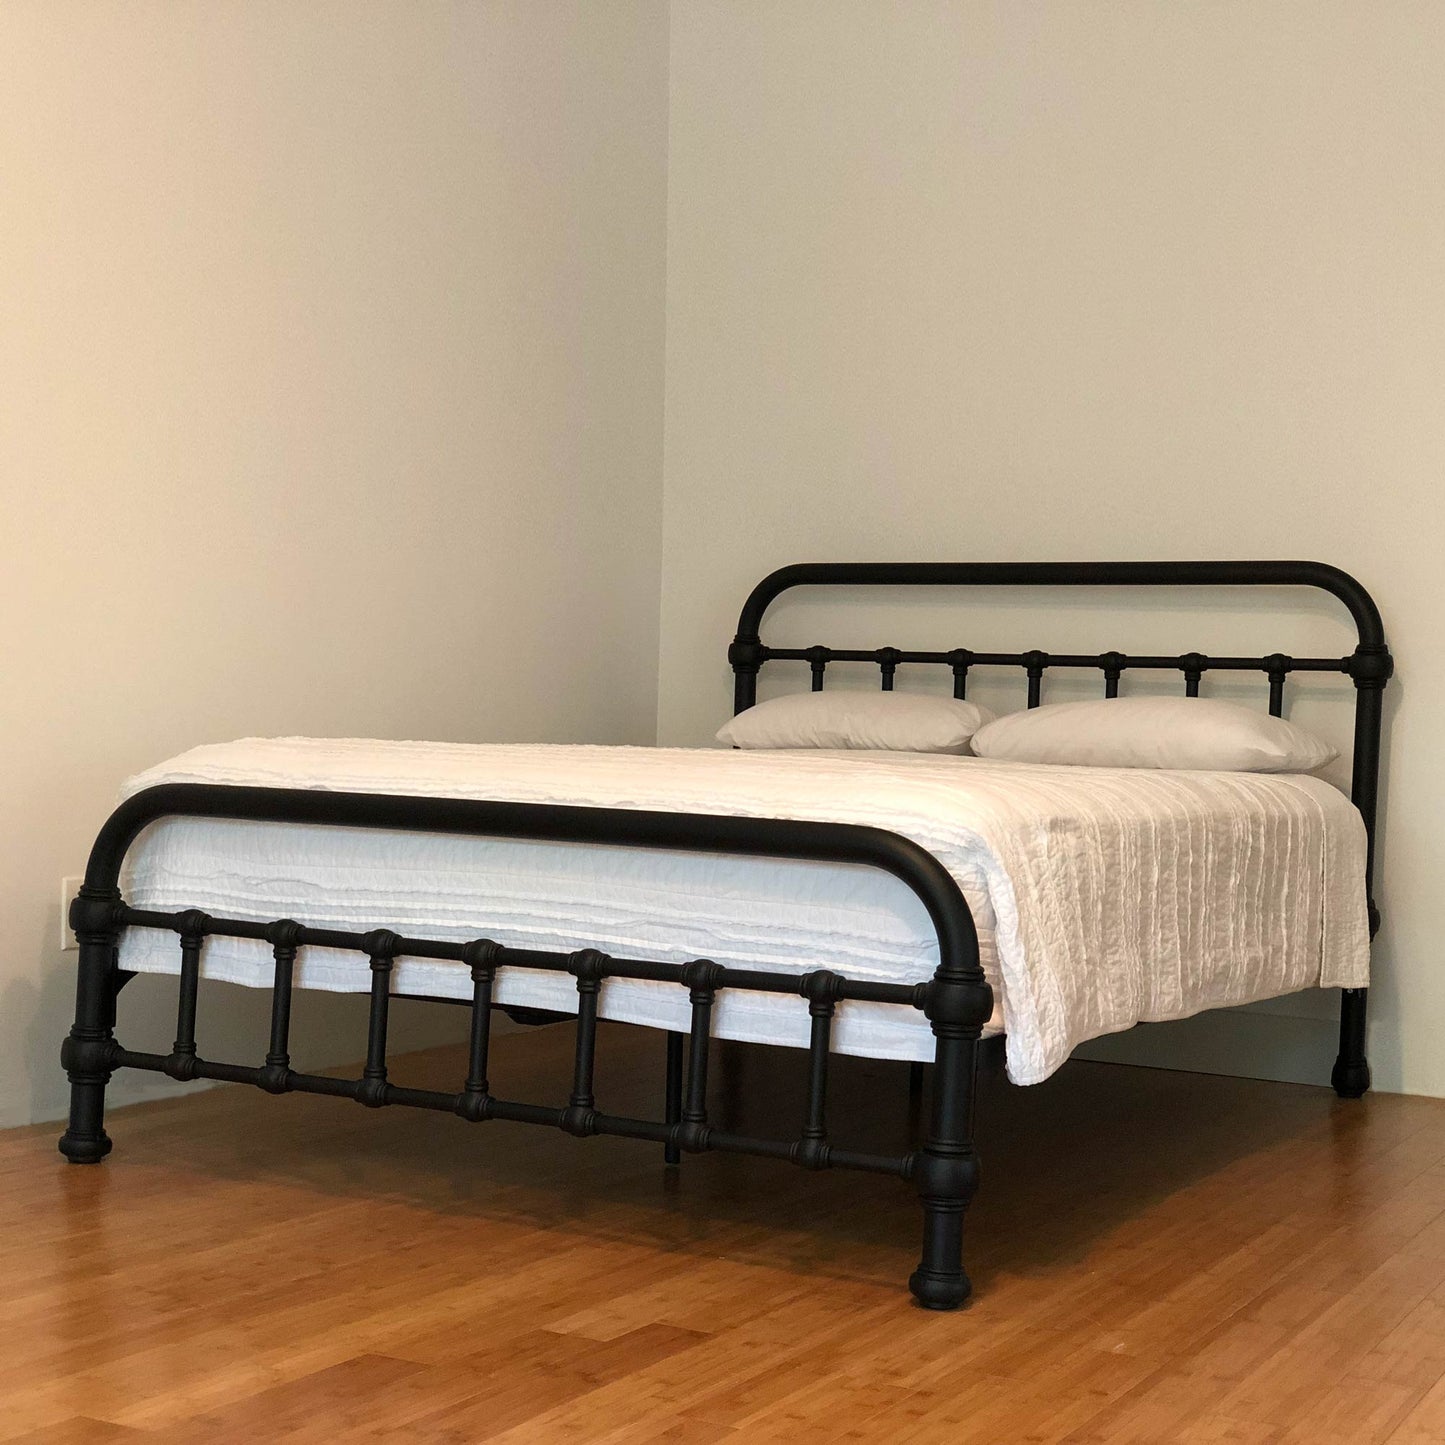 Heiressy's 20th c. Americana high-end modern iron platform bed has a heavy duty steel frame with wood slats. The luxury metal platform bed has many powder coat finish options including matte black, bronze, white, and antique finishes.